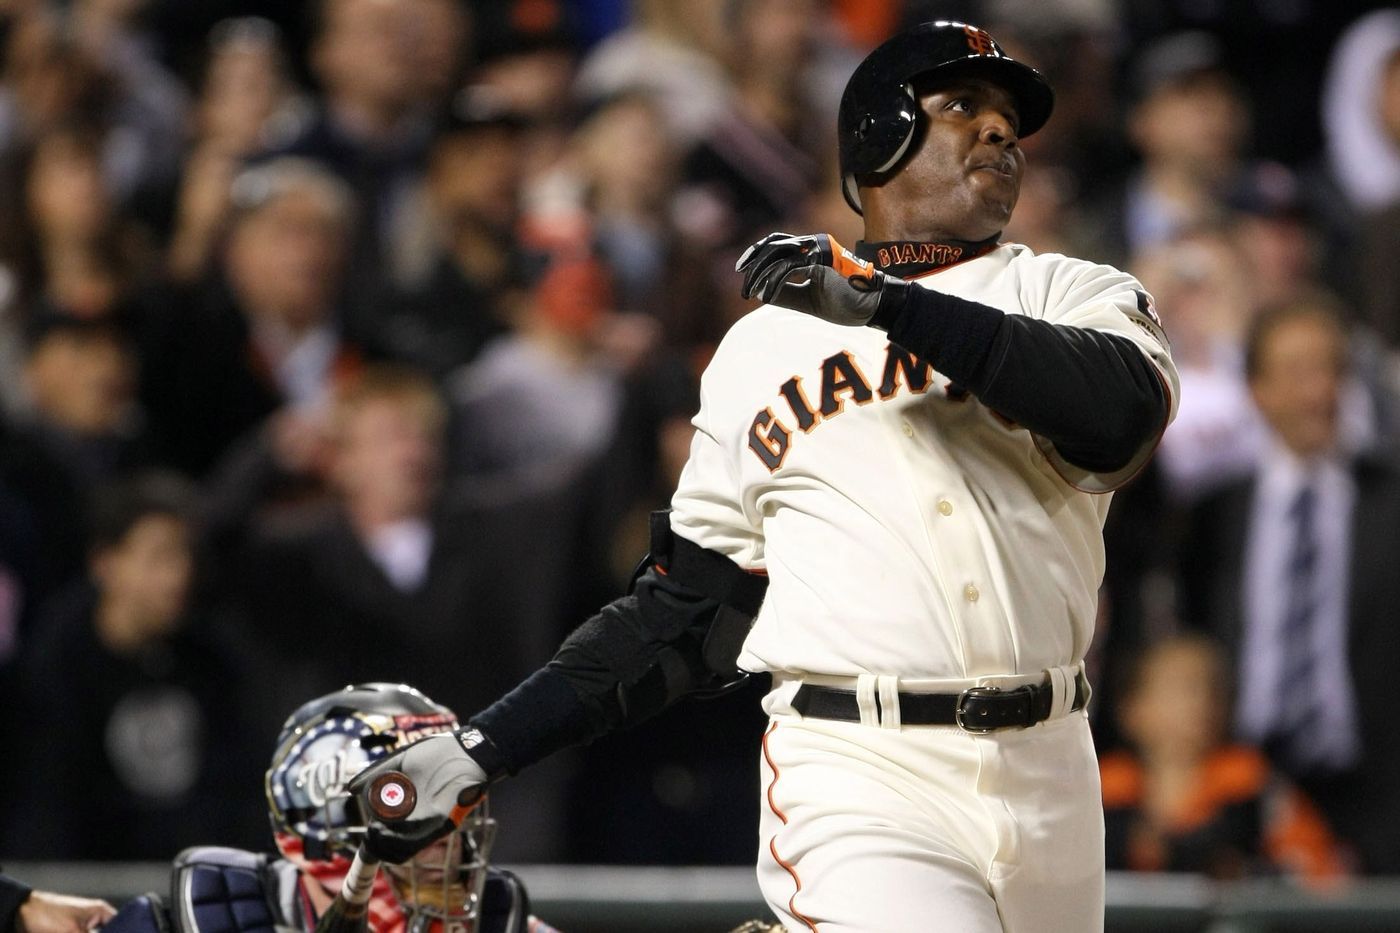 Is this Barry Bonds feat the most unbreakable record of all time? the Box Score